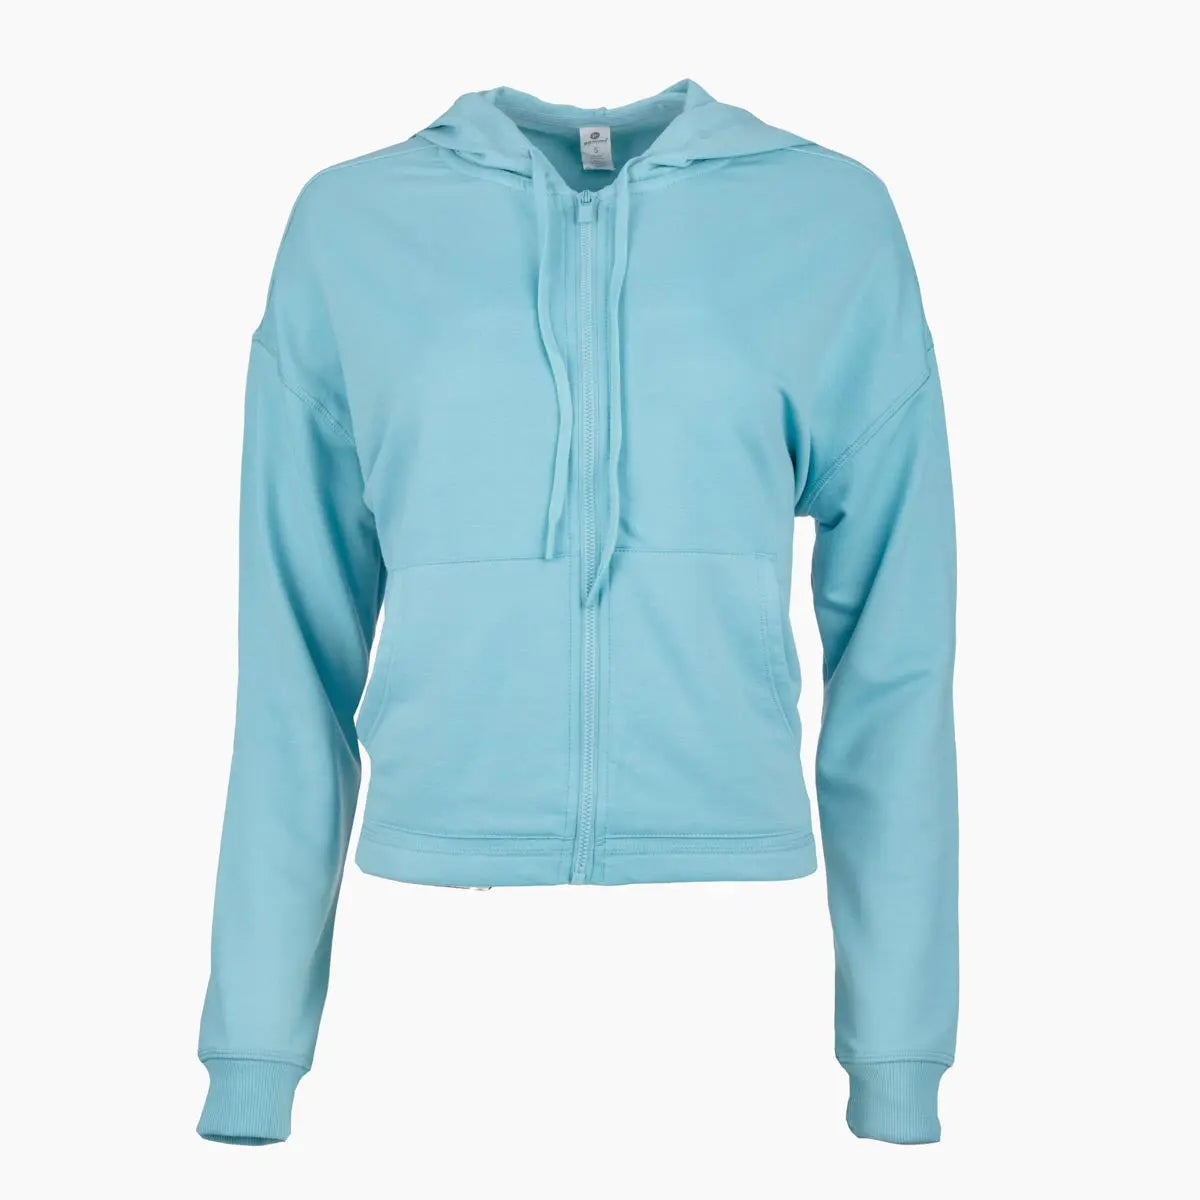 90 Degree by Reflex Women's Terry Brushed Hoodie Jacket